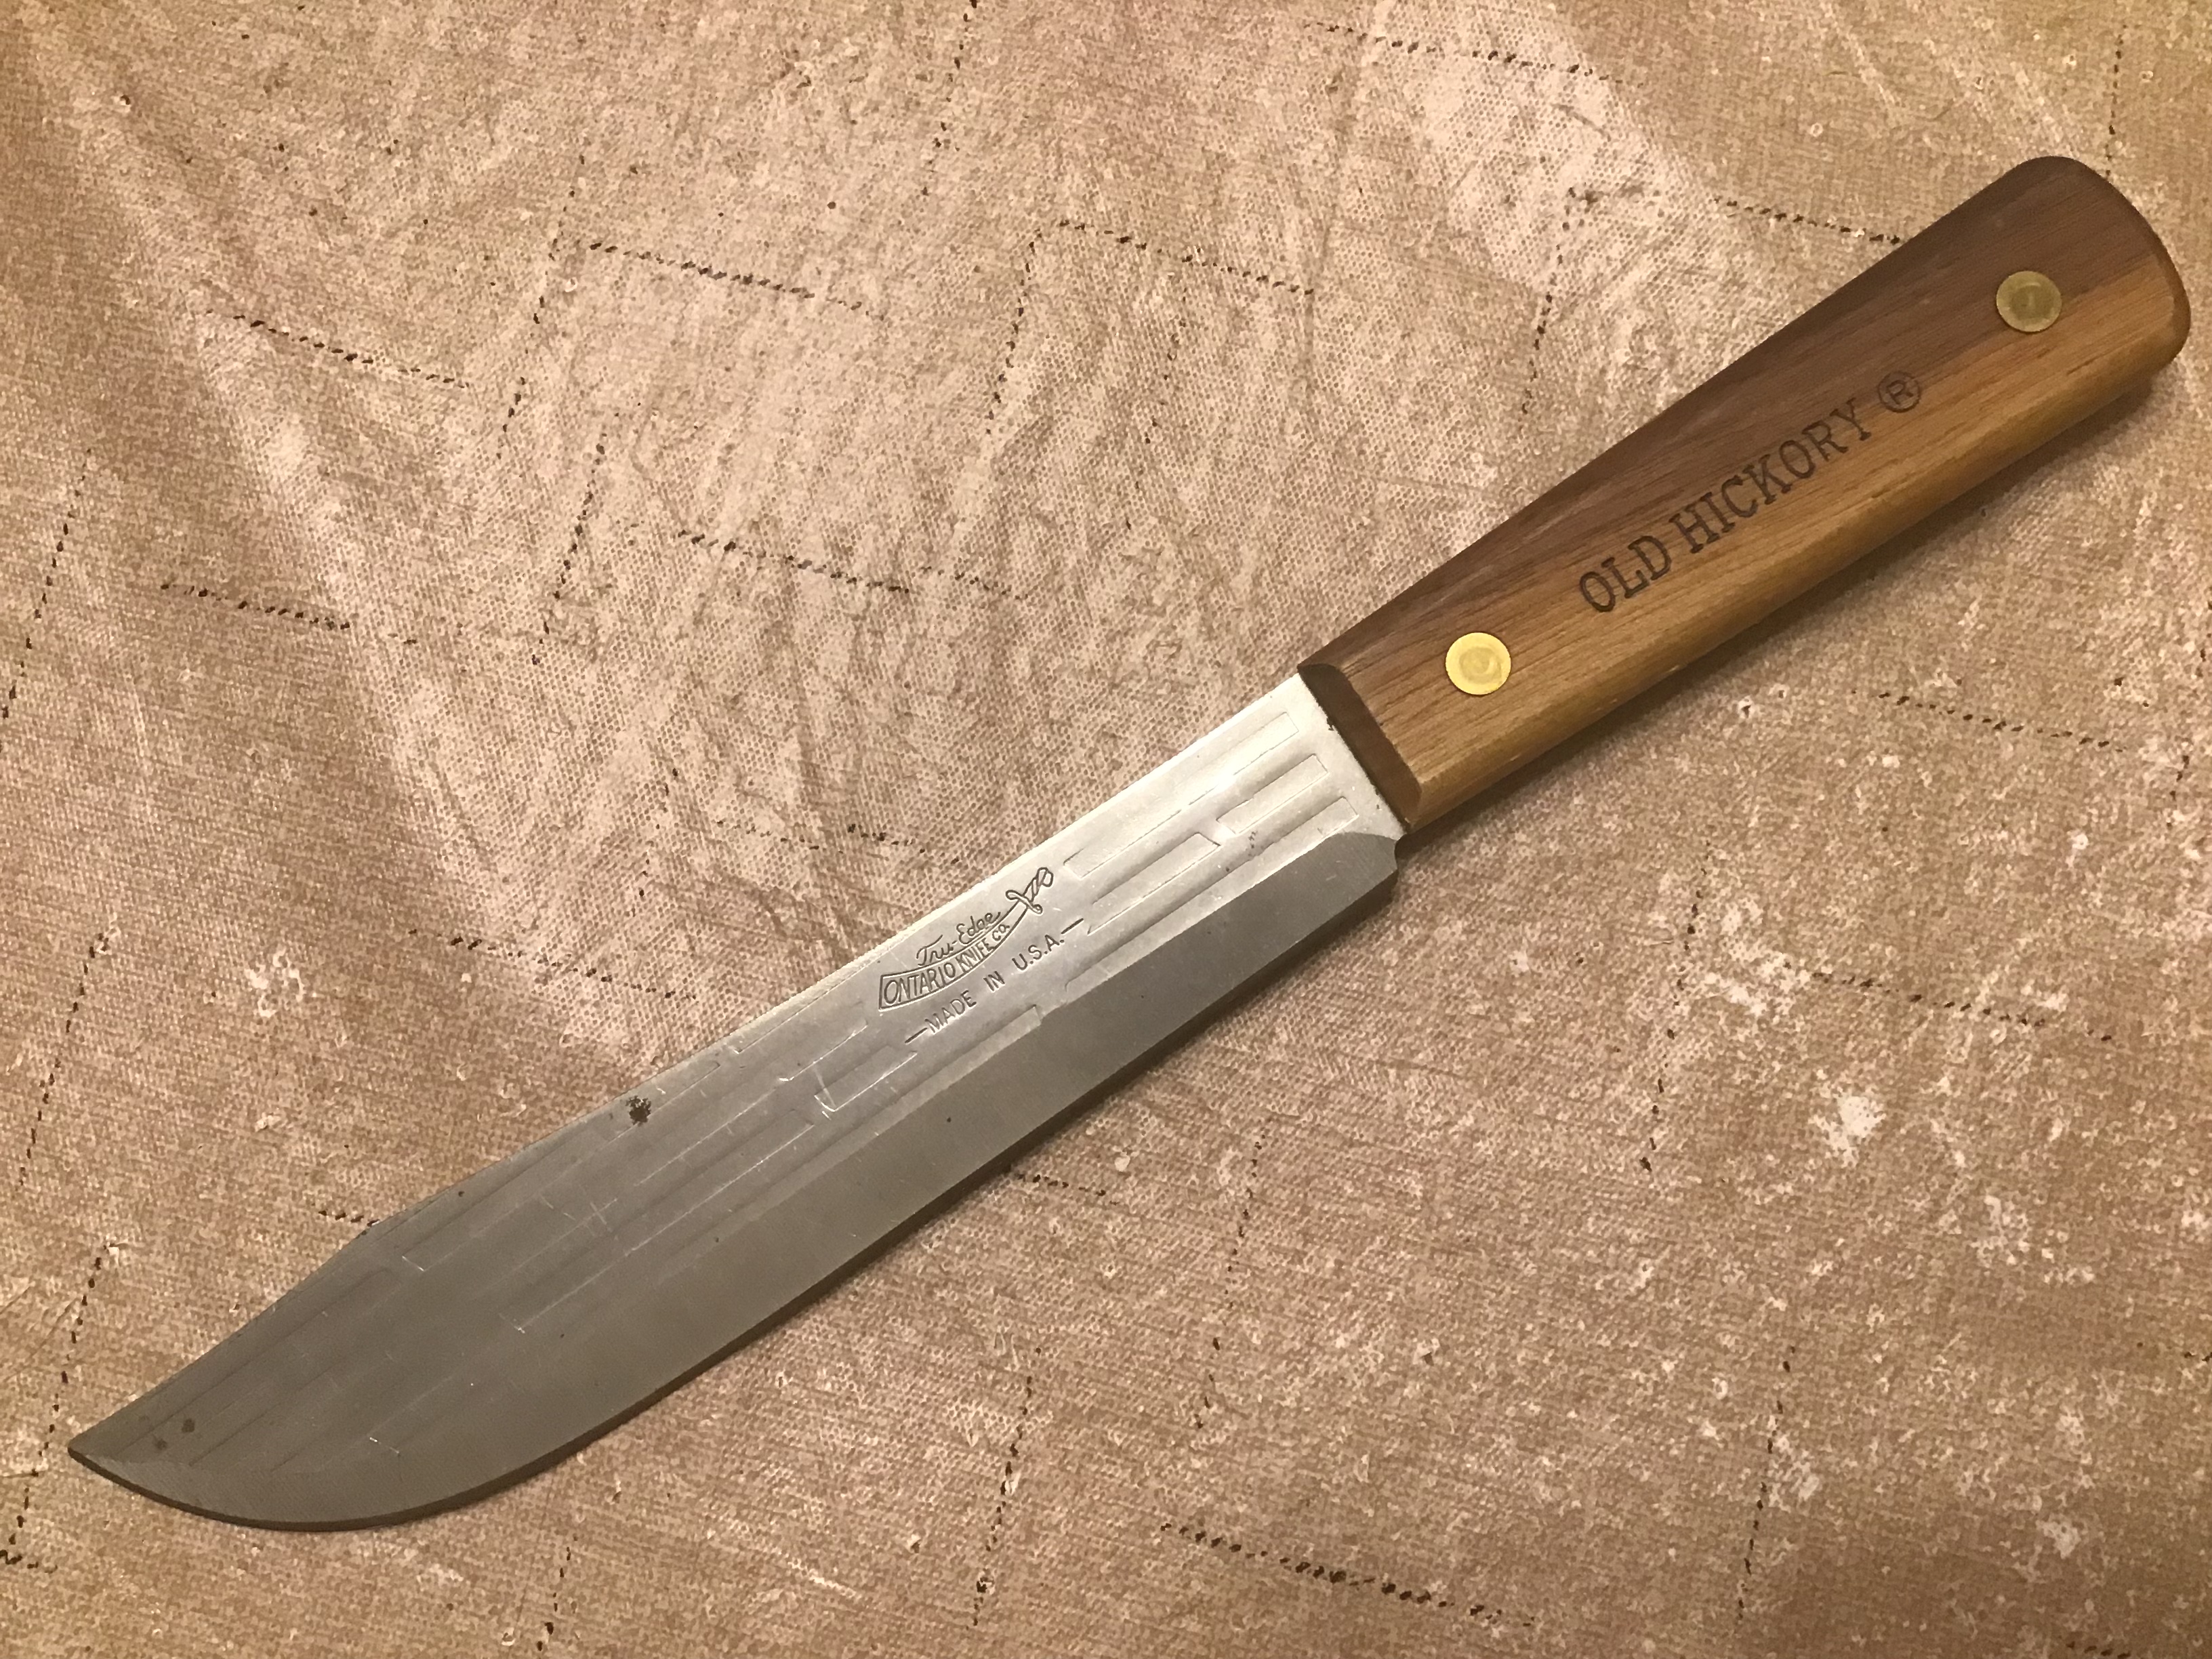 Old Hickory butchers knife that I cleaned the rust off of, thinned